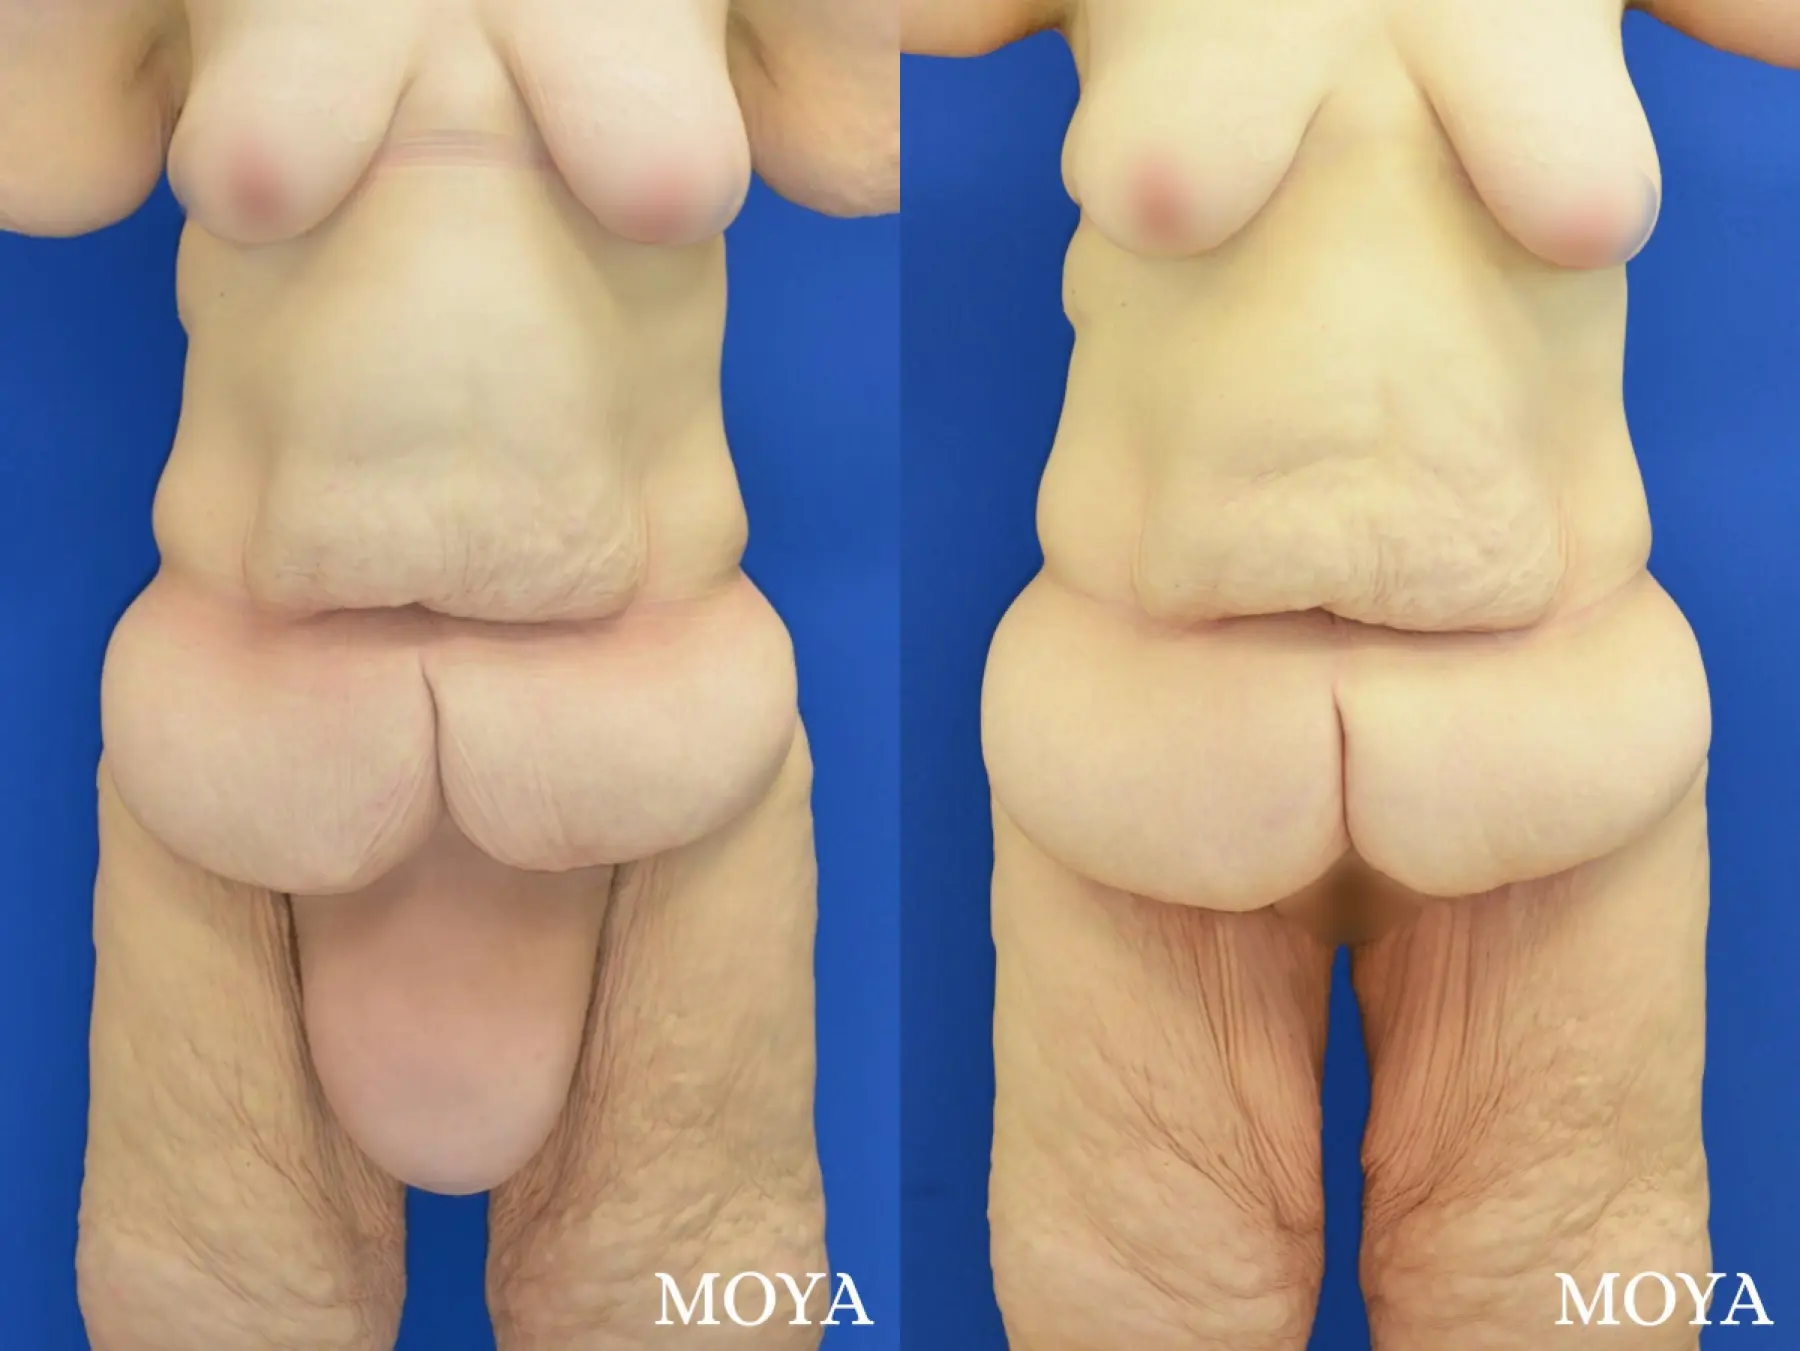 Mons Pubis Reduction: Patient 2 - Before and After 1